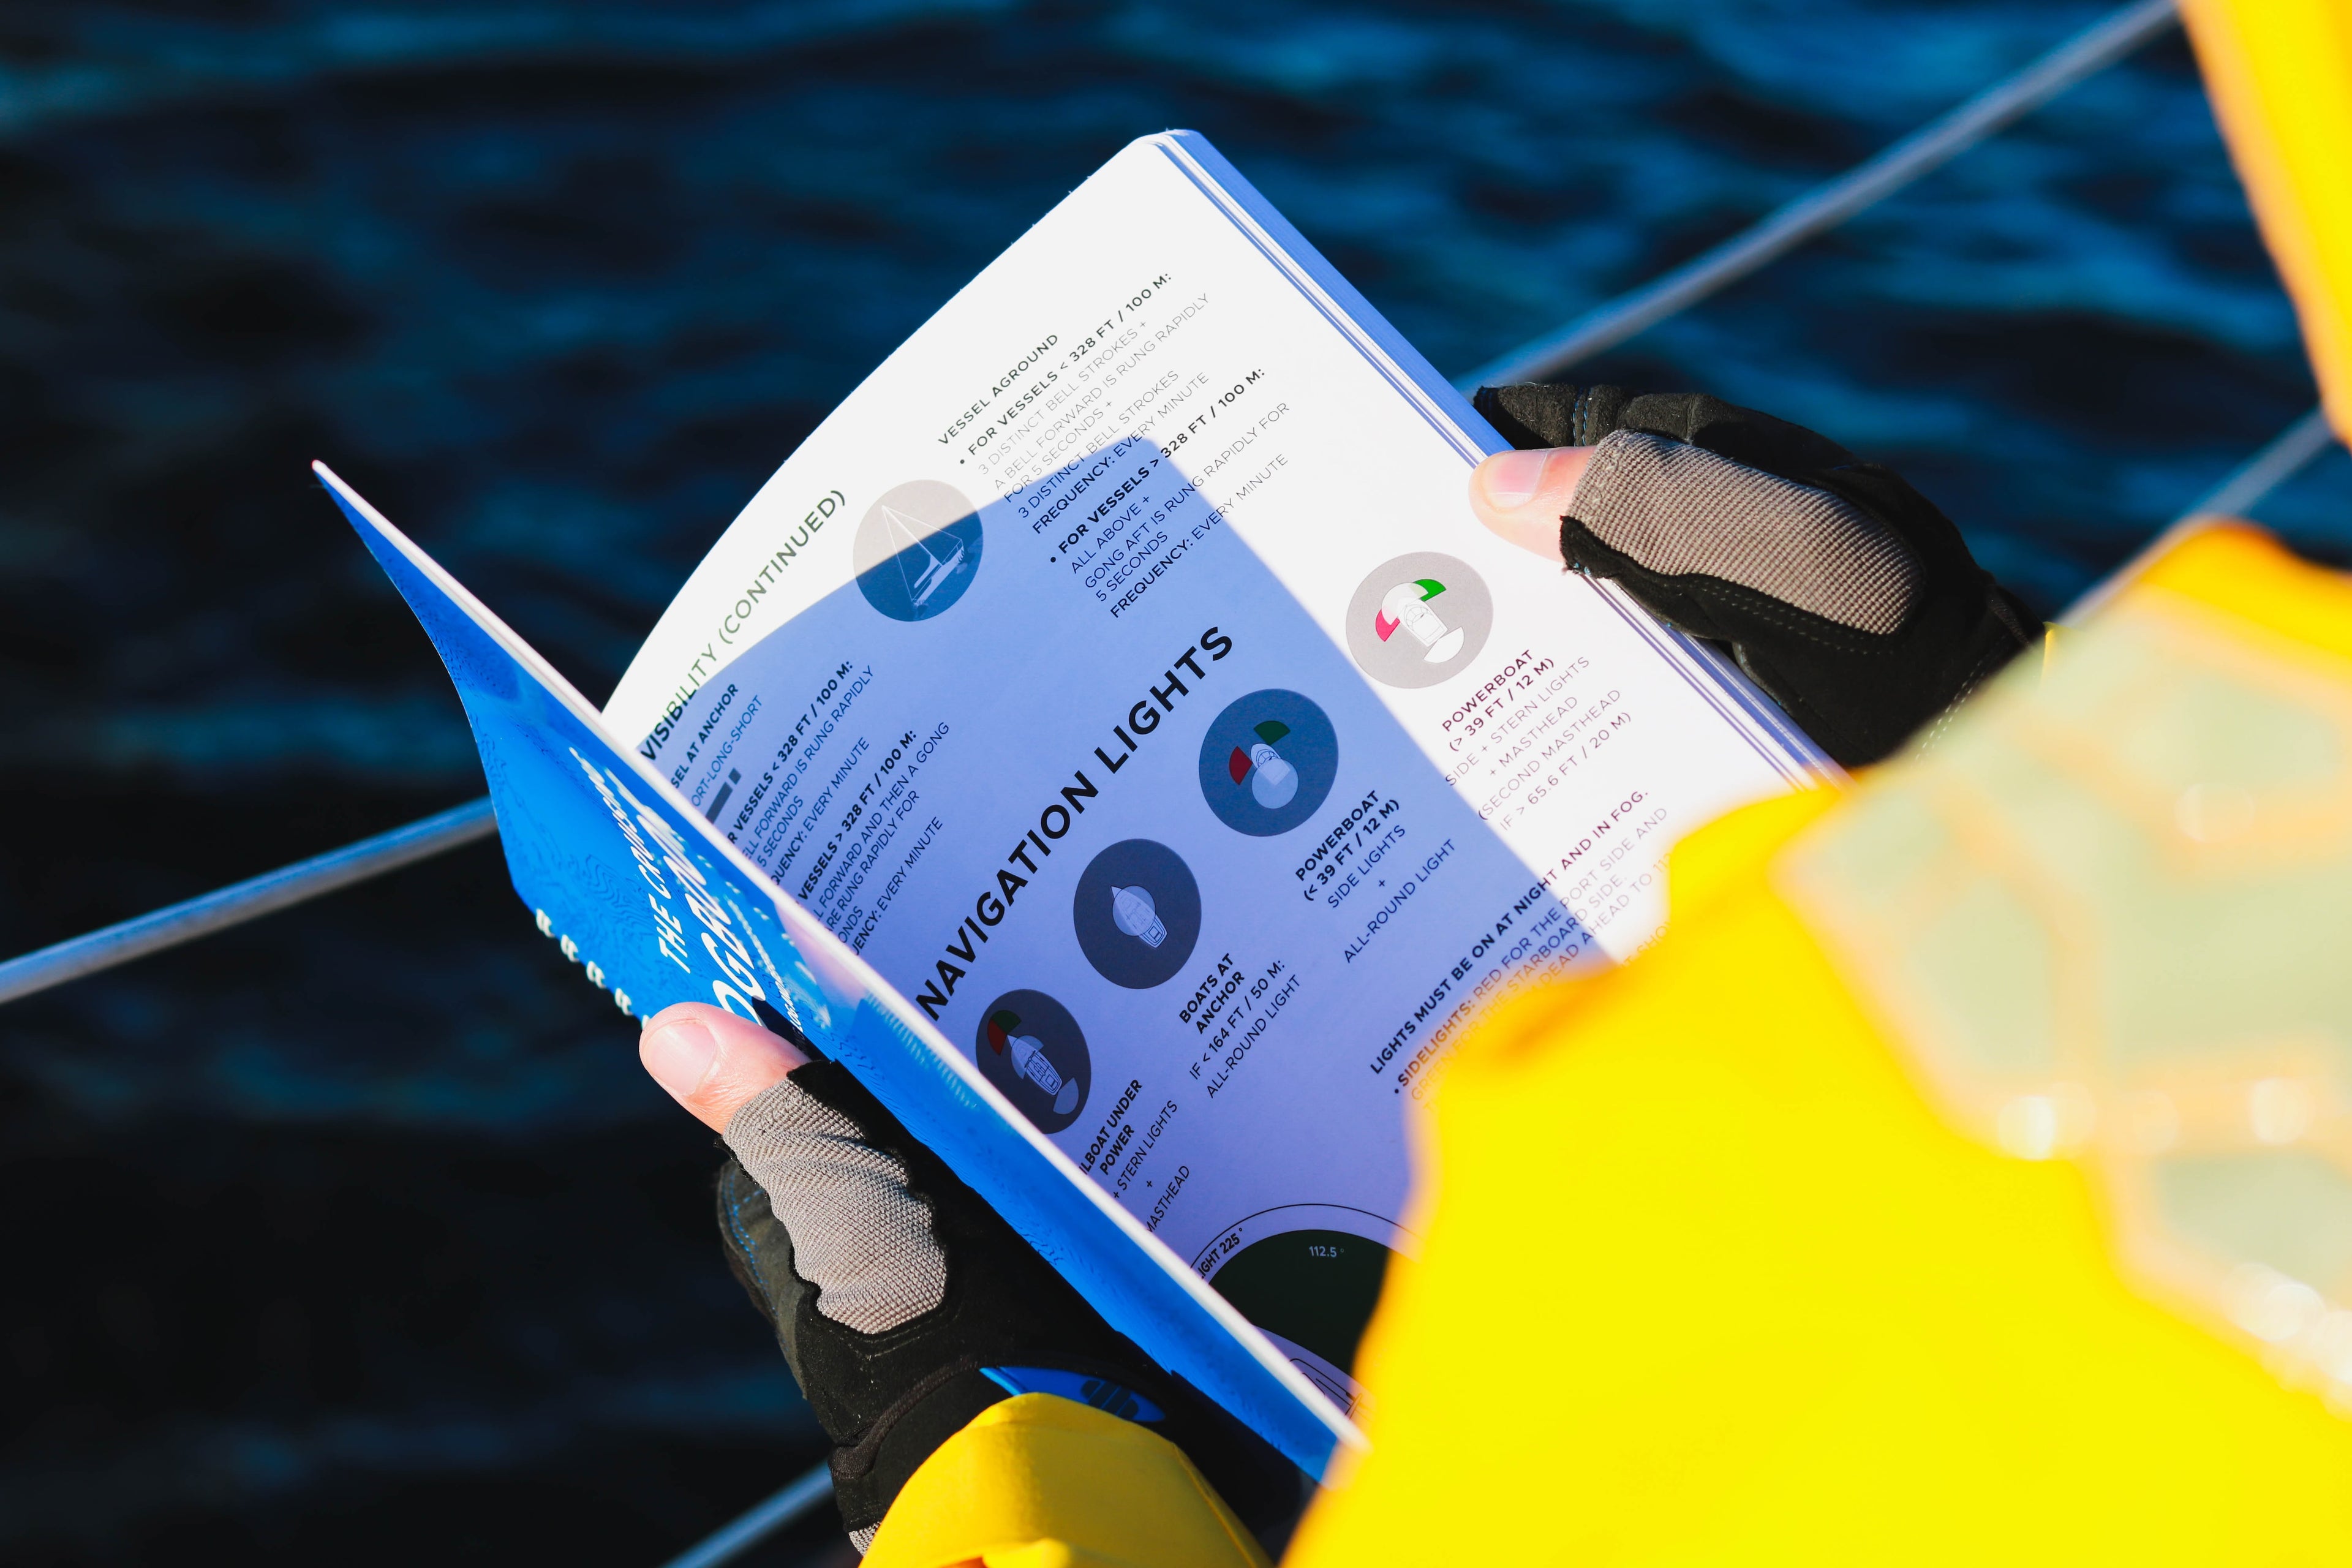 Photo: Marine sailing logbook with a reference guide open